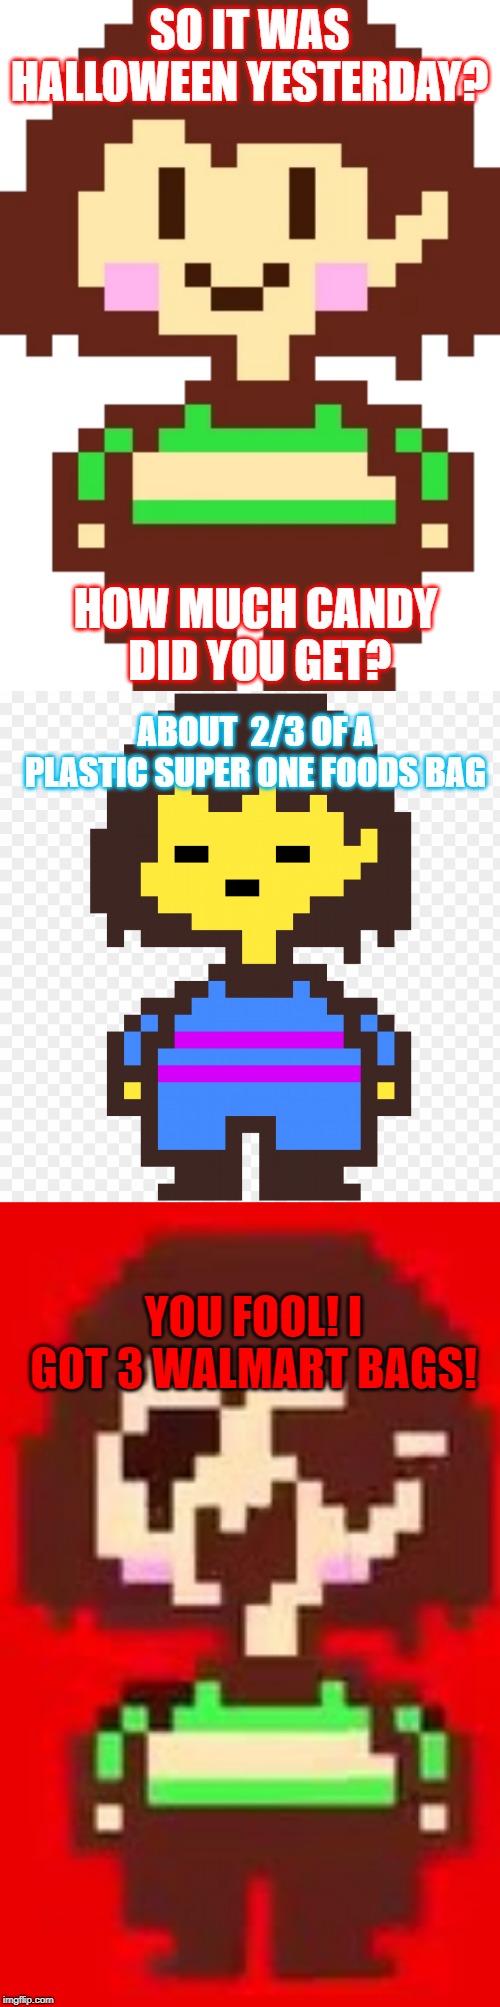 Halloween candy amounts: | SO IT WAS HALLOWEEN YESTERDAY? HOW MUCH CANDY  DID YOU GET? ABOUT  2/3 OF A PLASTIC SUPER ONE FOODS BAG; YOU FOOL! I GOT 3 WALMART BAGS! | image tagged in undertale,chara,frisk,halloween,candy,jumpscare | made w/ Imgflip meme maker